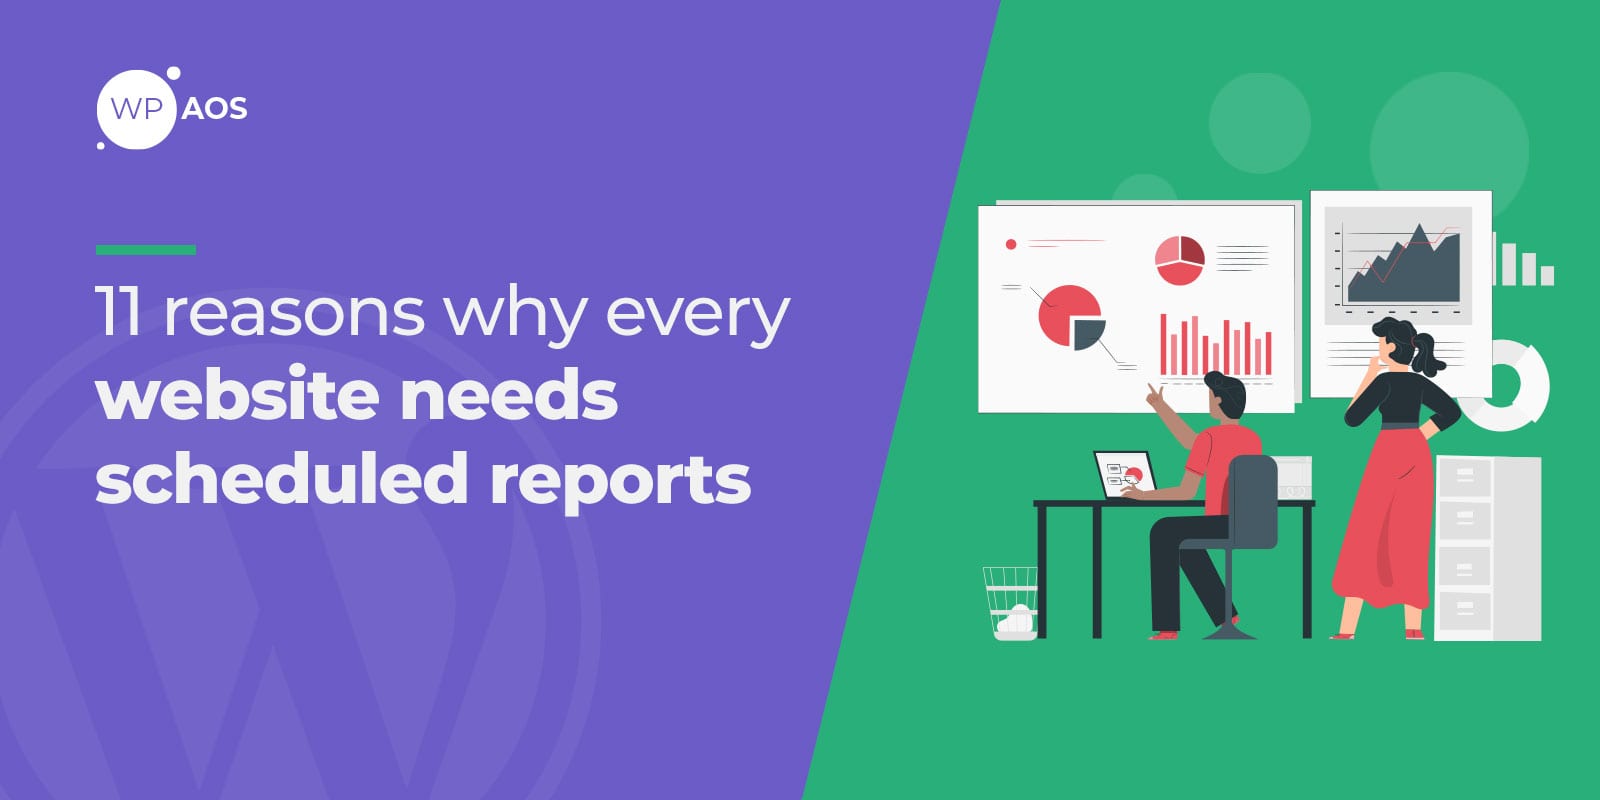 scheduled reports, wordpress maintenance, woocommerce support, wpaos